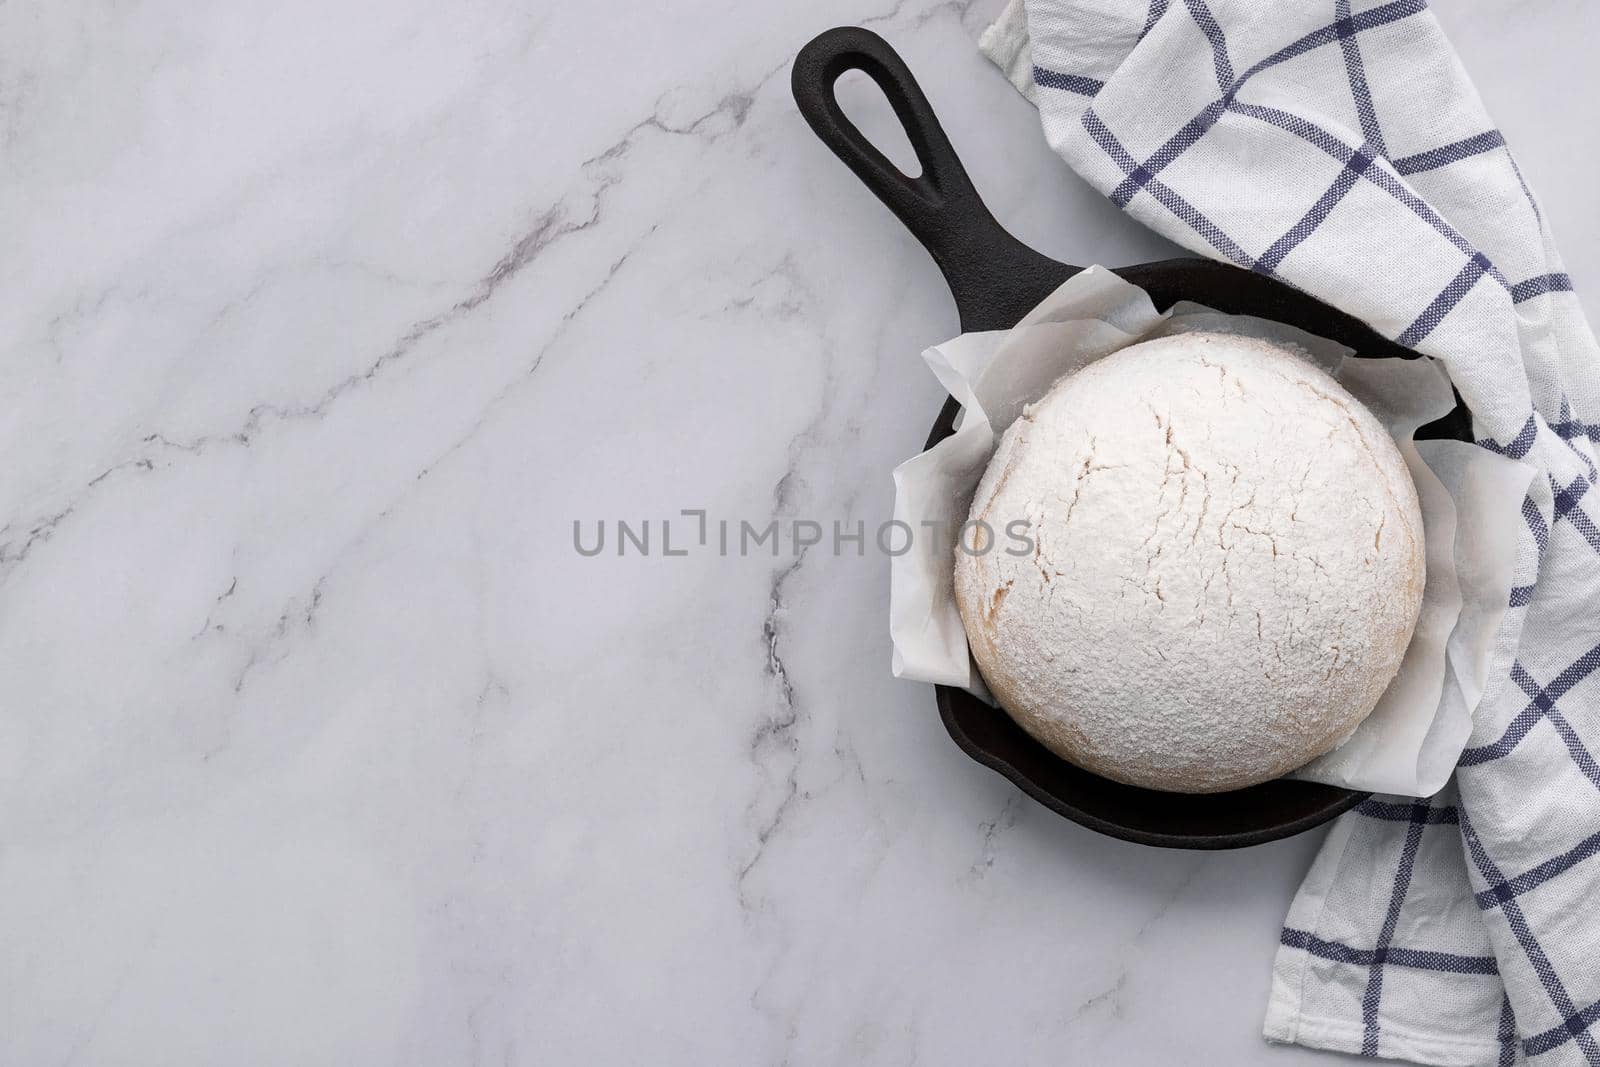 Fresh raw  homemade yeast dough resting in cast iron skillet on marble table flat lay.
 by kerdkanno